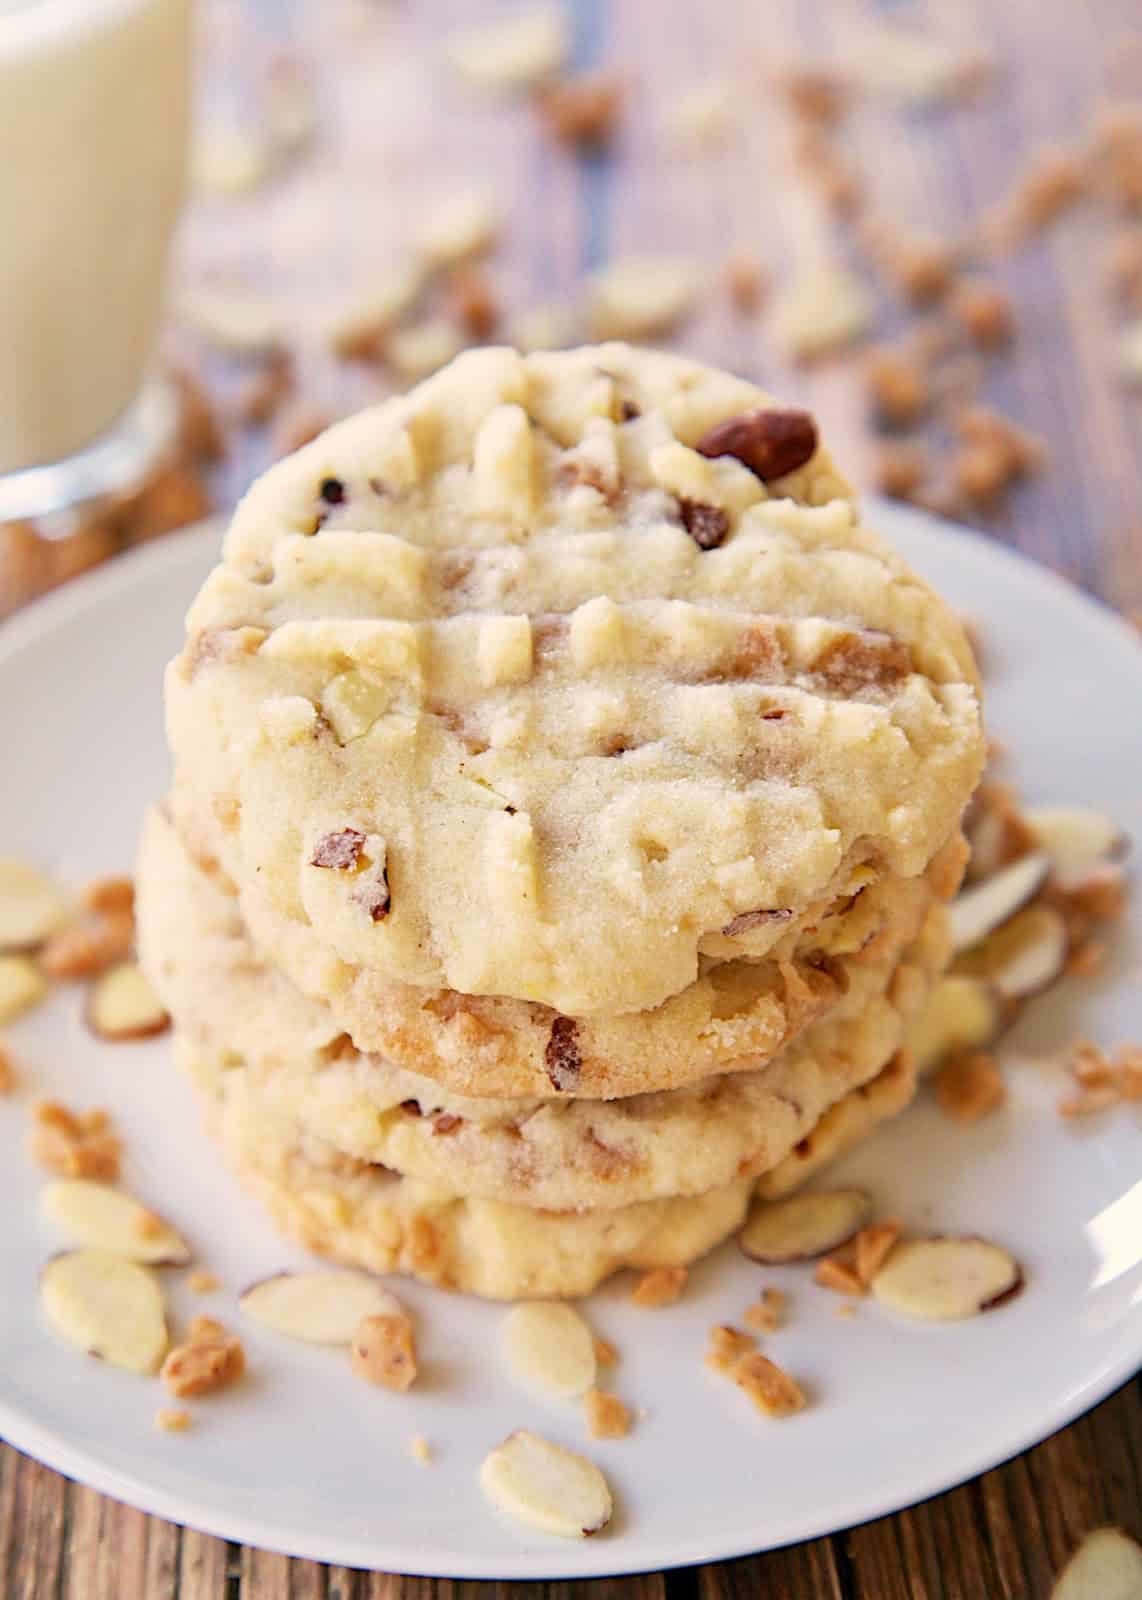 Triple Almond Cookies Recipe - cookies packed with tons of great almond flavor - almond extract, chopped almonds and almond toffee bits! We ate WAY too many of these cookies. Makes a ton. Great for a potluck!